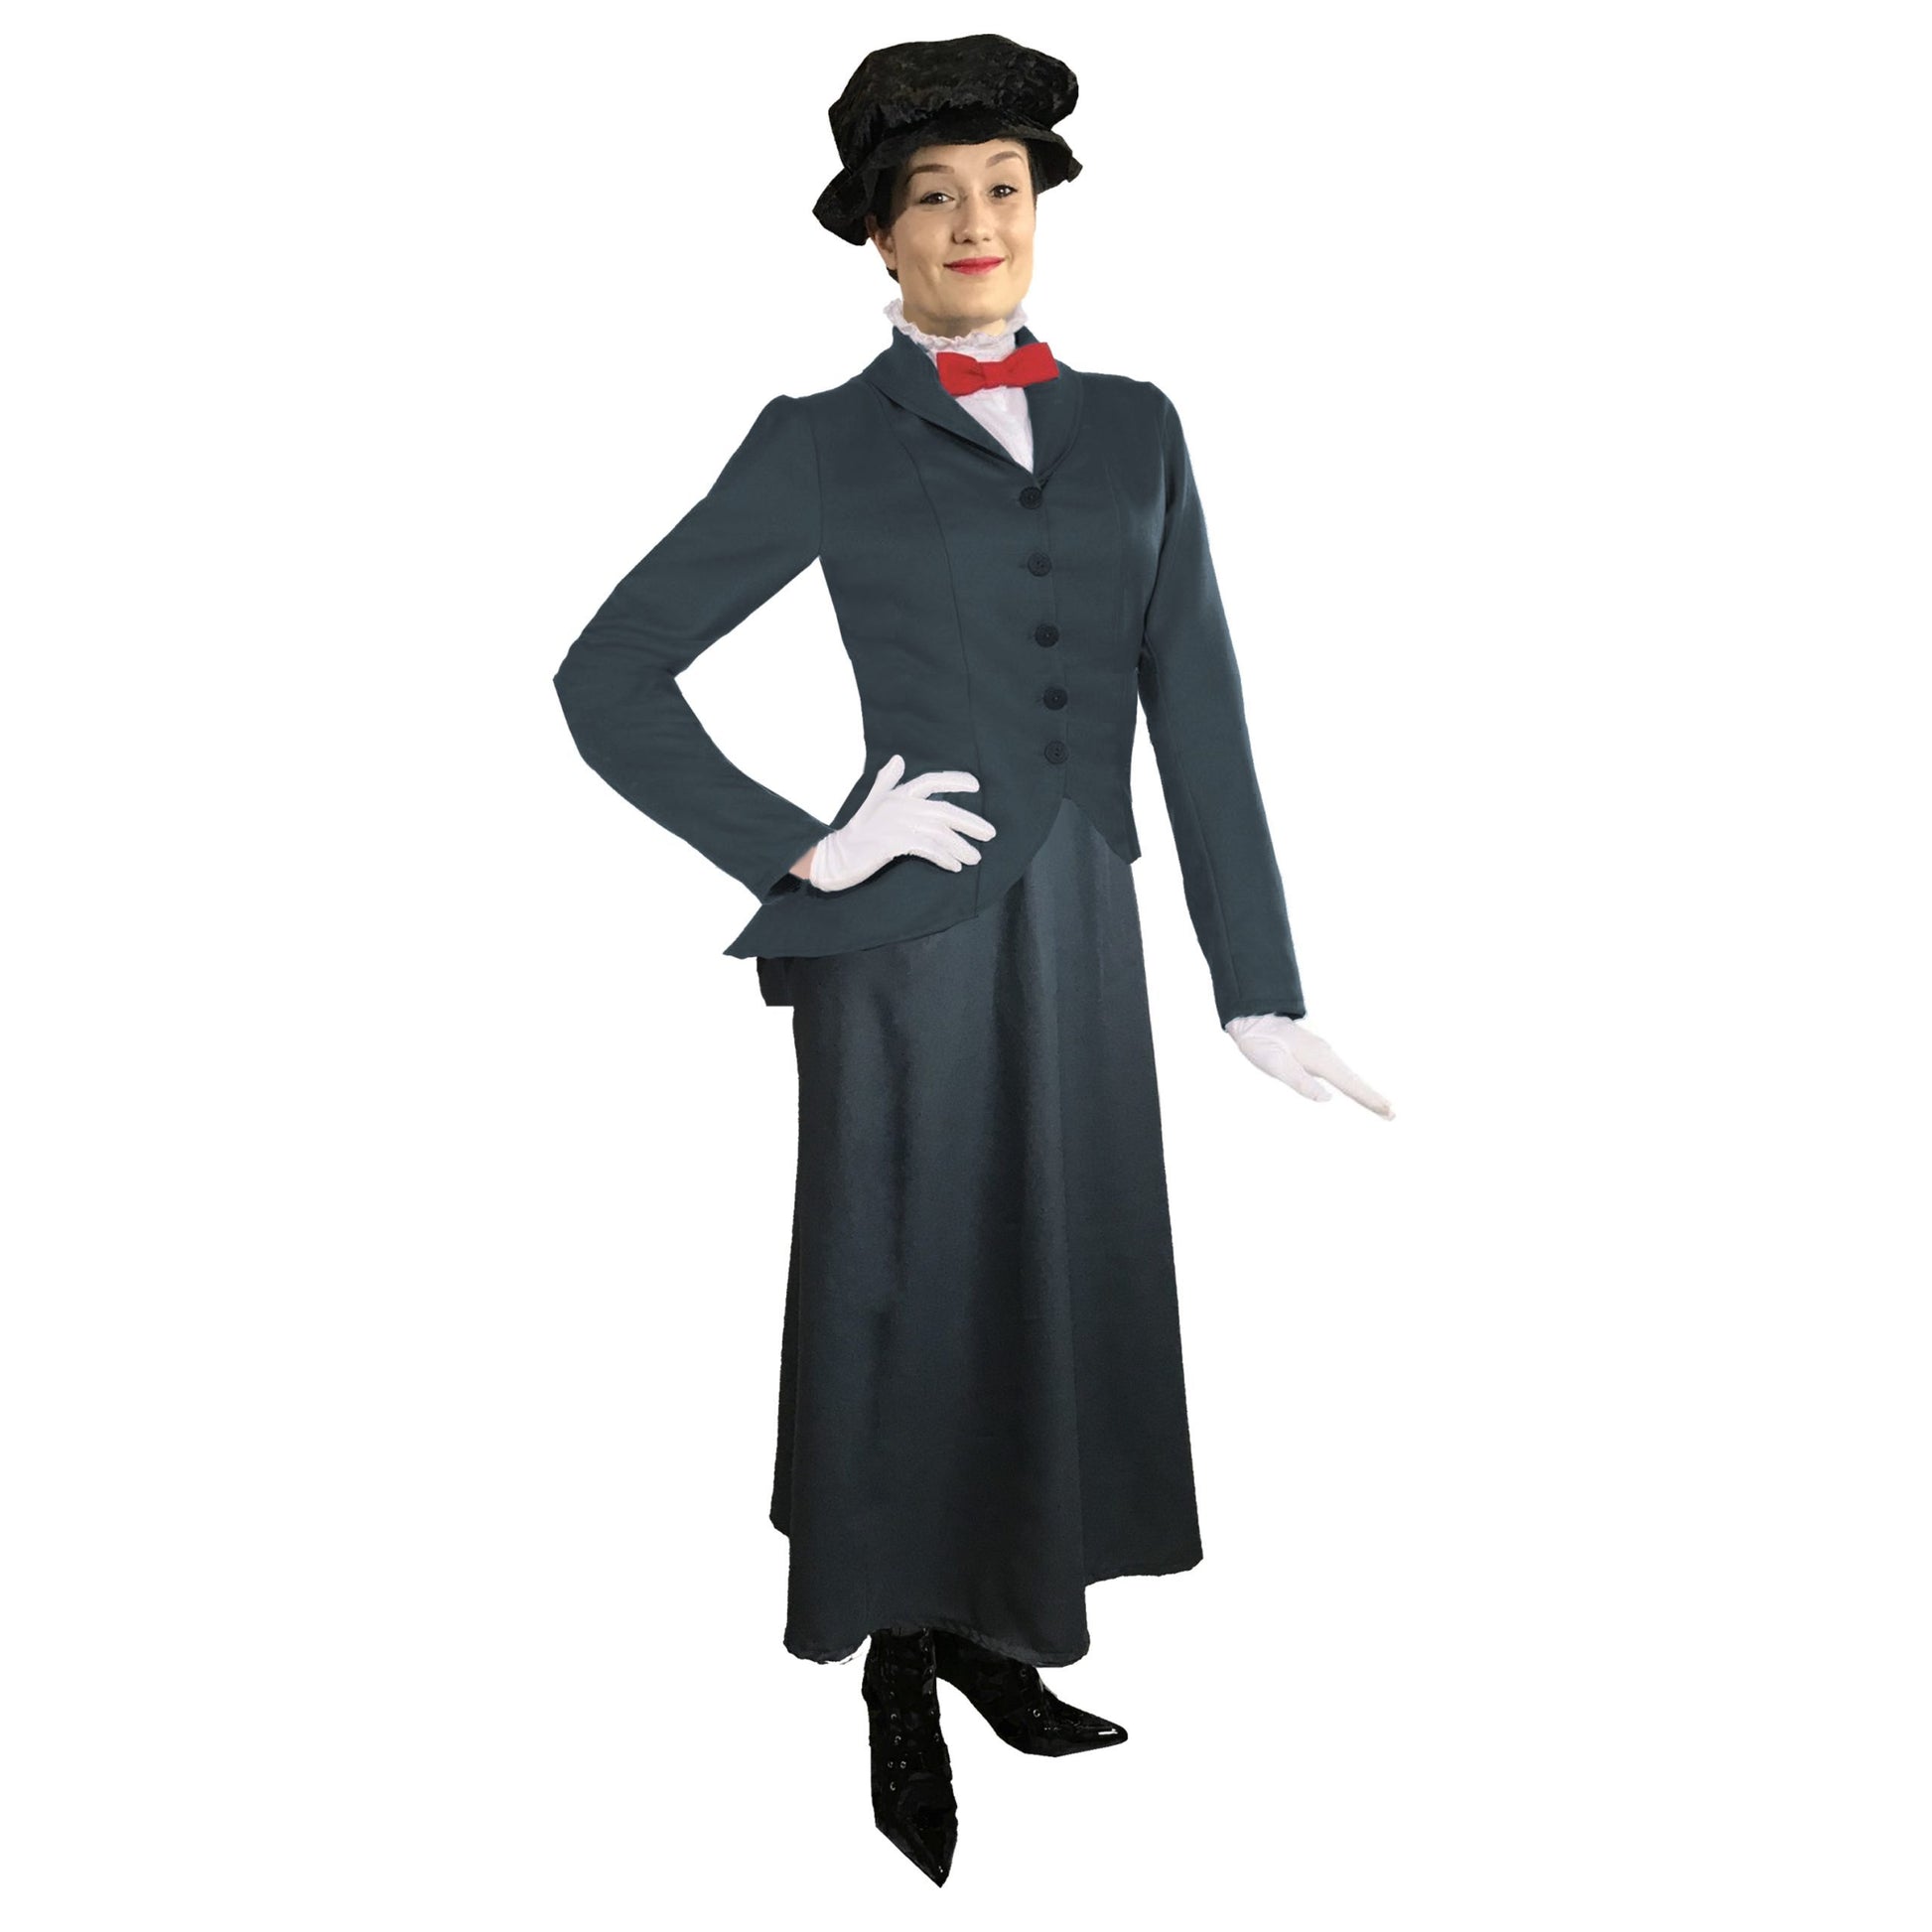 Mary Poppins Fancy Dress Costume